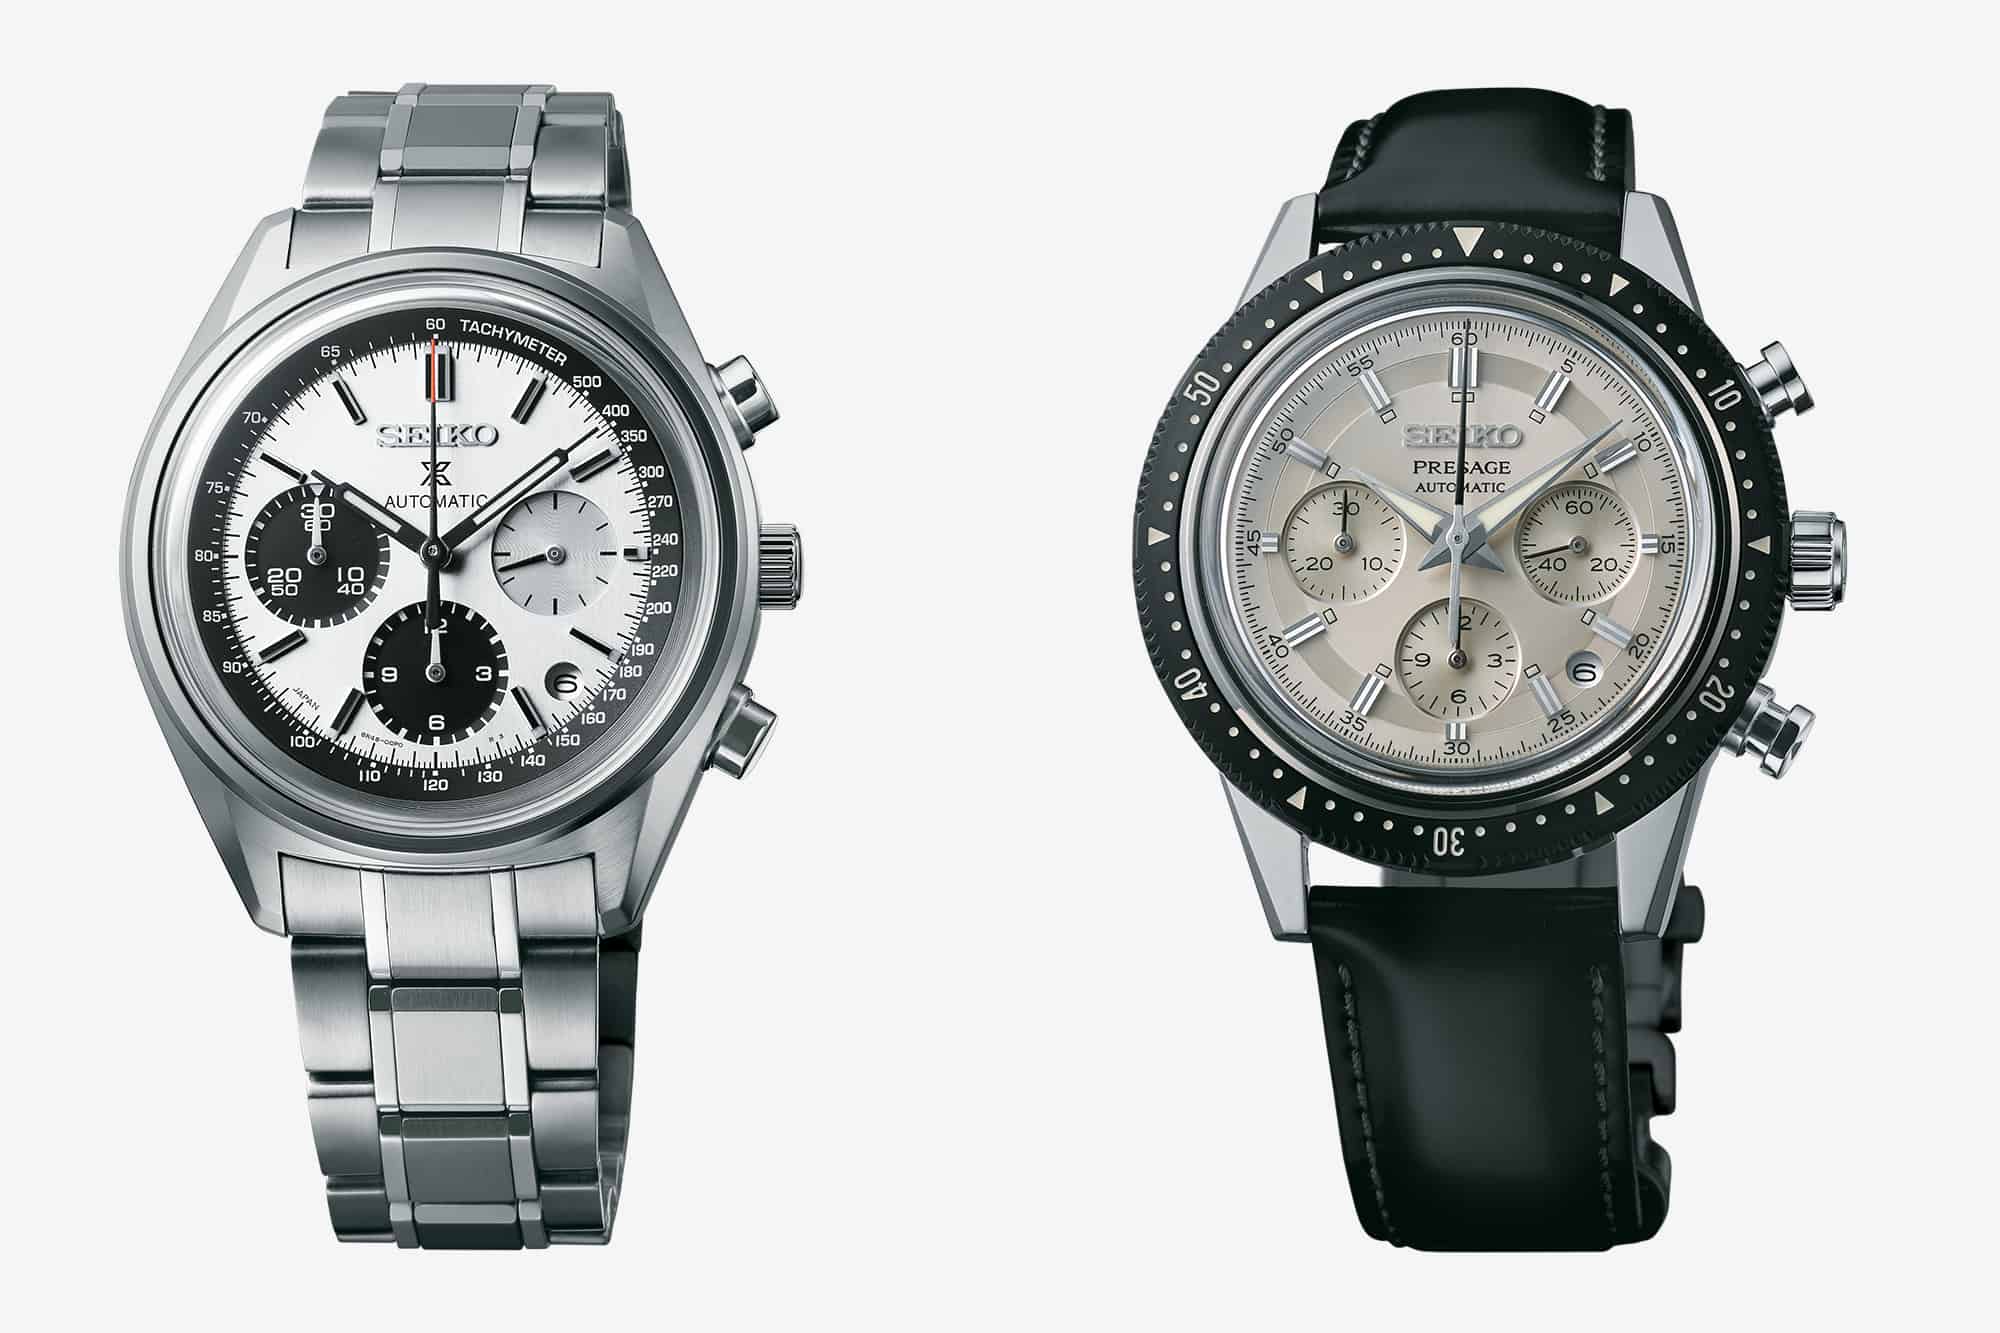 Introducing Two New Vintage Inspired Seikos Celebrating Their Rich Chronograph History (Refs. SRQ029 and SRQ031)